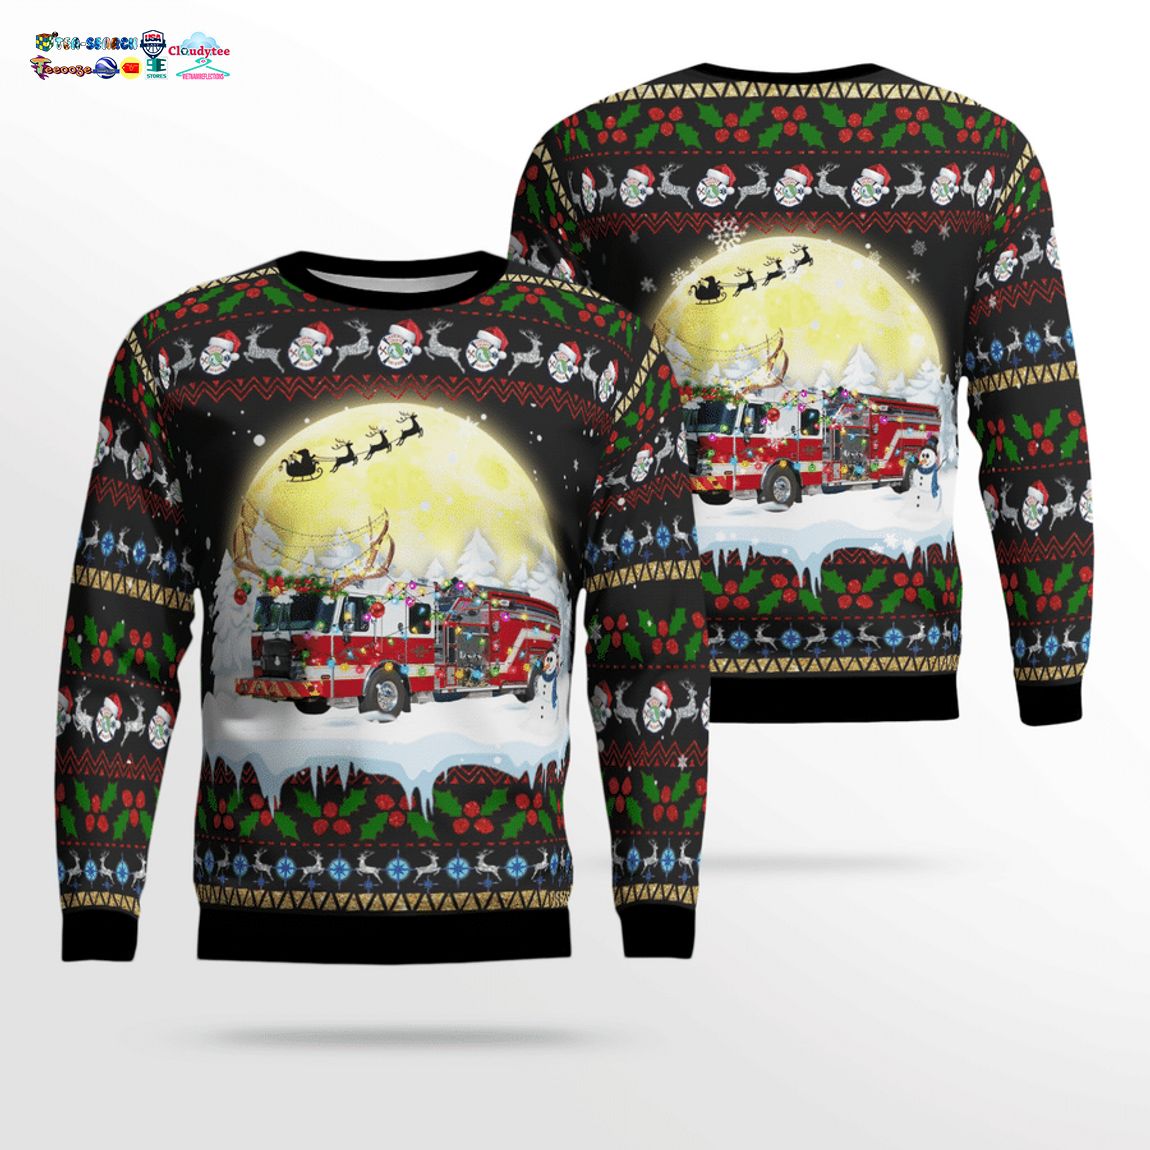 Florida Charlotte County Fire Department 3D Christmas Sweater